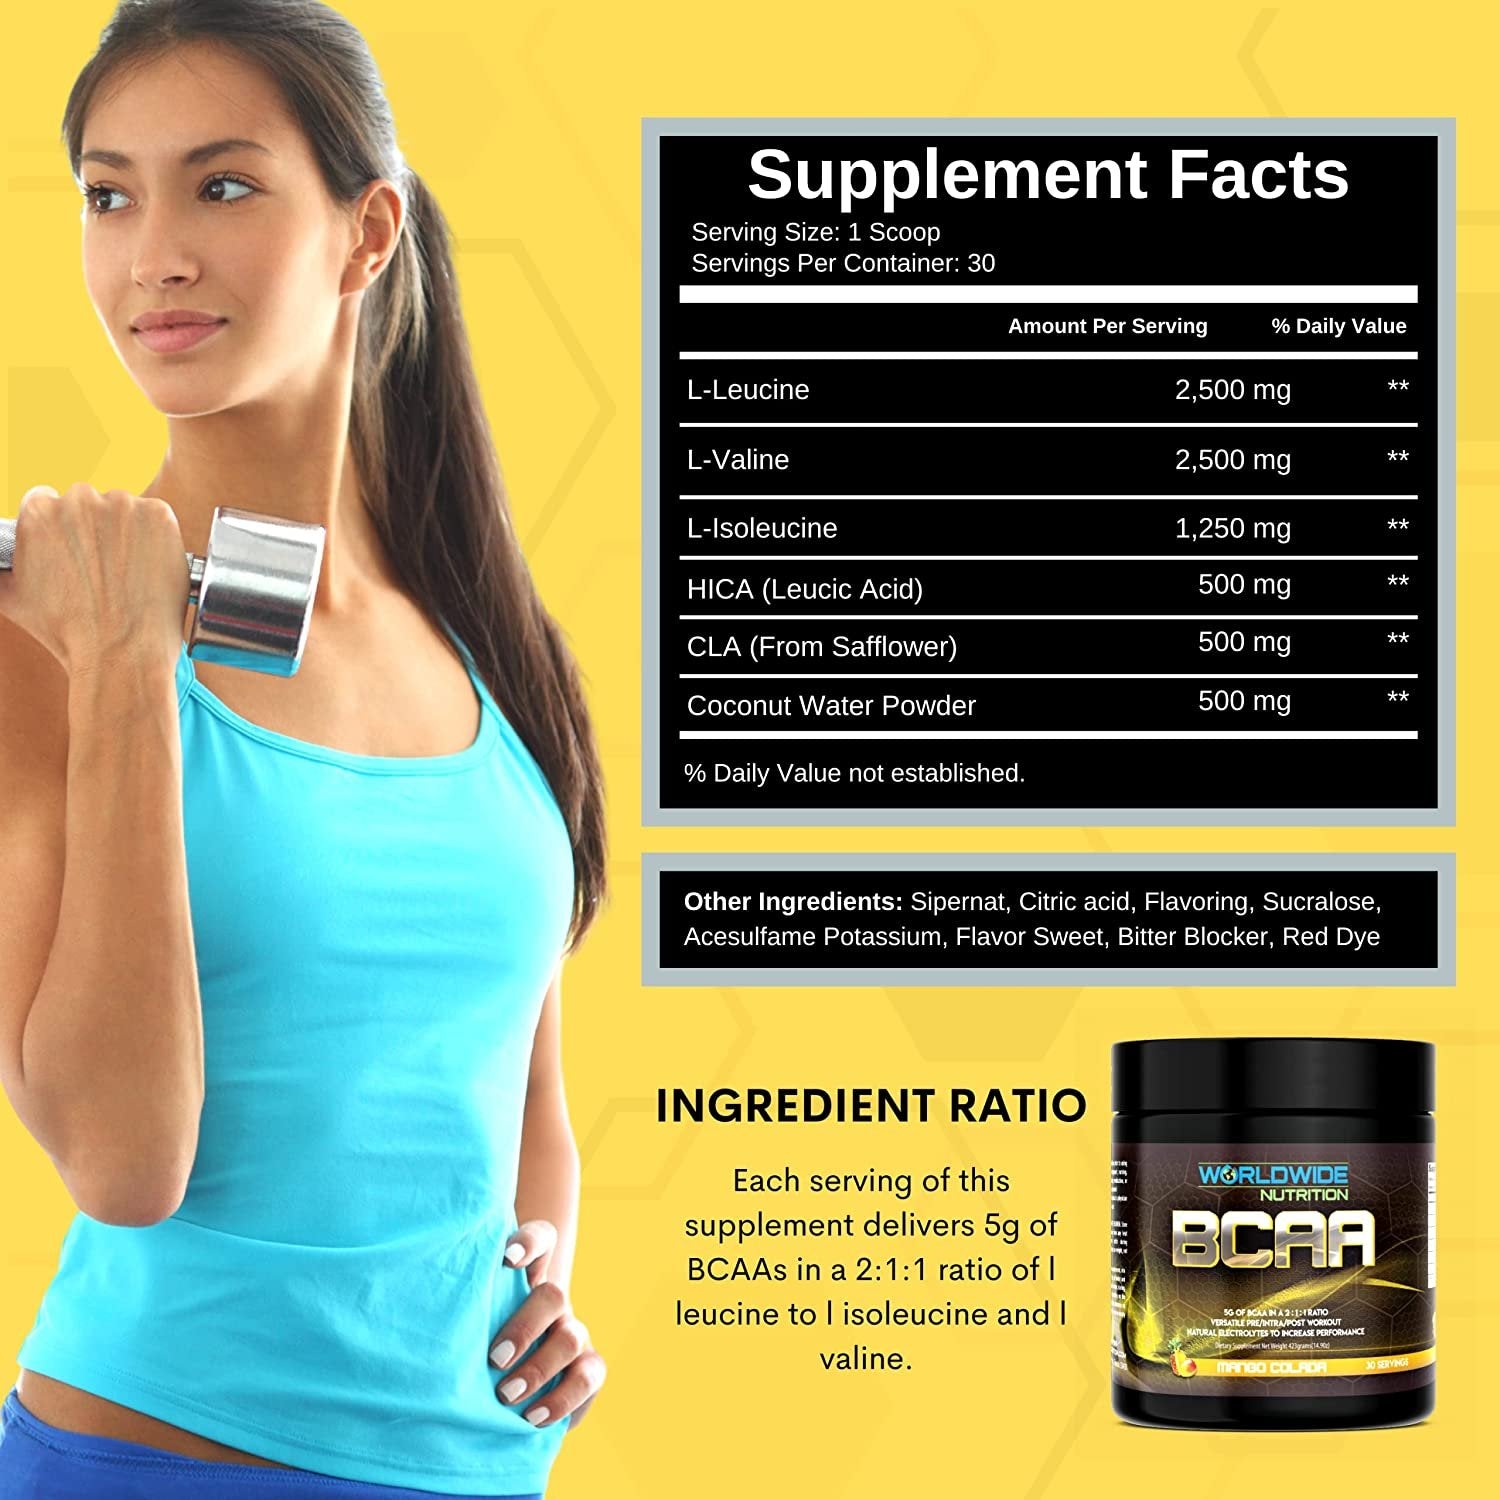 Worldwide Nutrition BCAA Powder - Branched Chain Amino Acids - Pre Intra Post Workout Supplement for Men and Women - Natural Electrolytes Powder for BCAA Energy - Mango Colada - 30 Servings